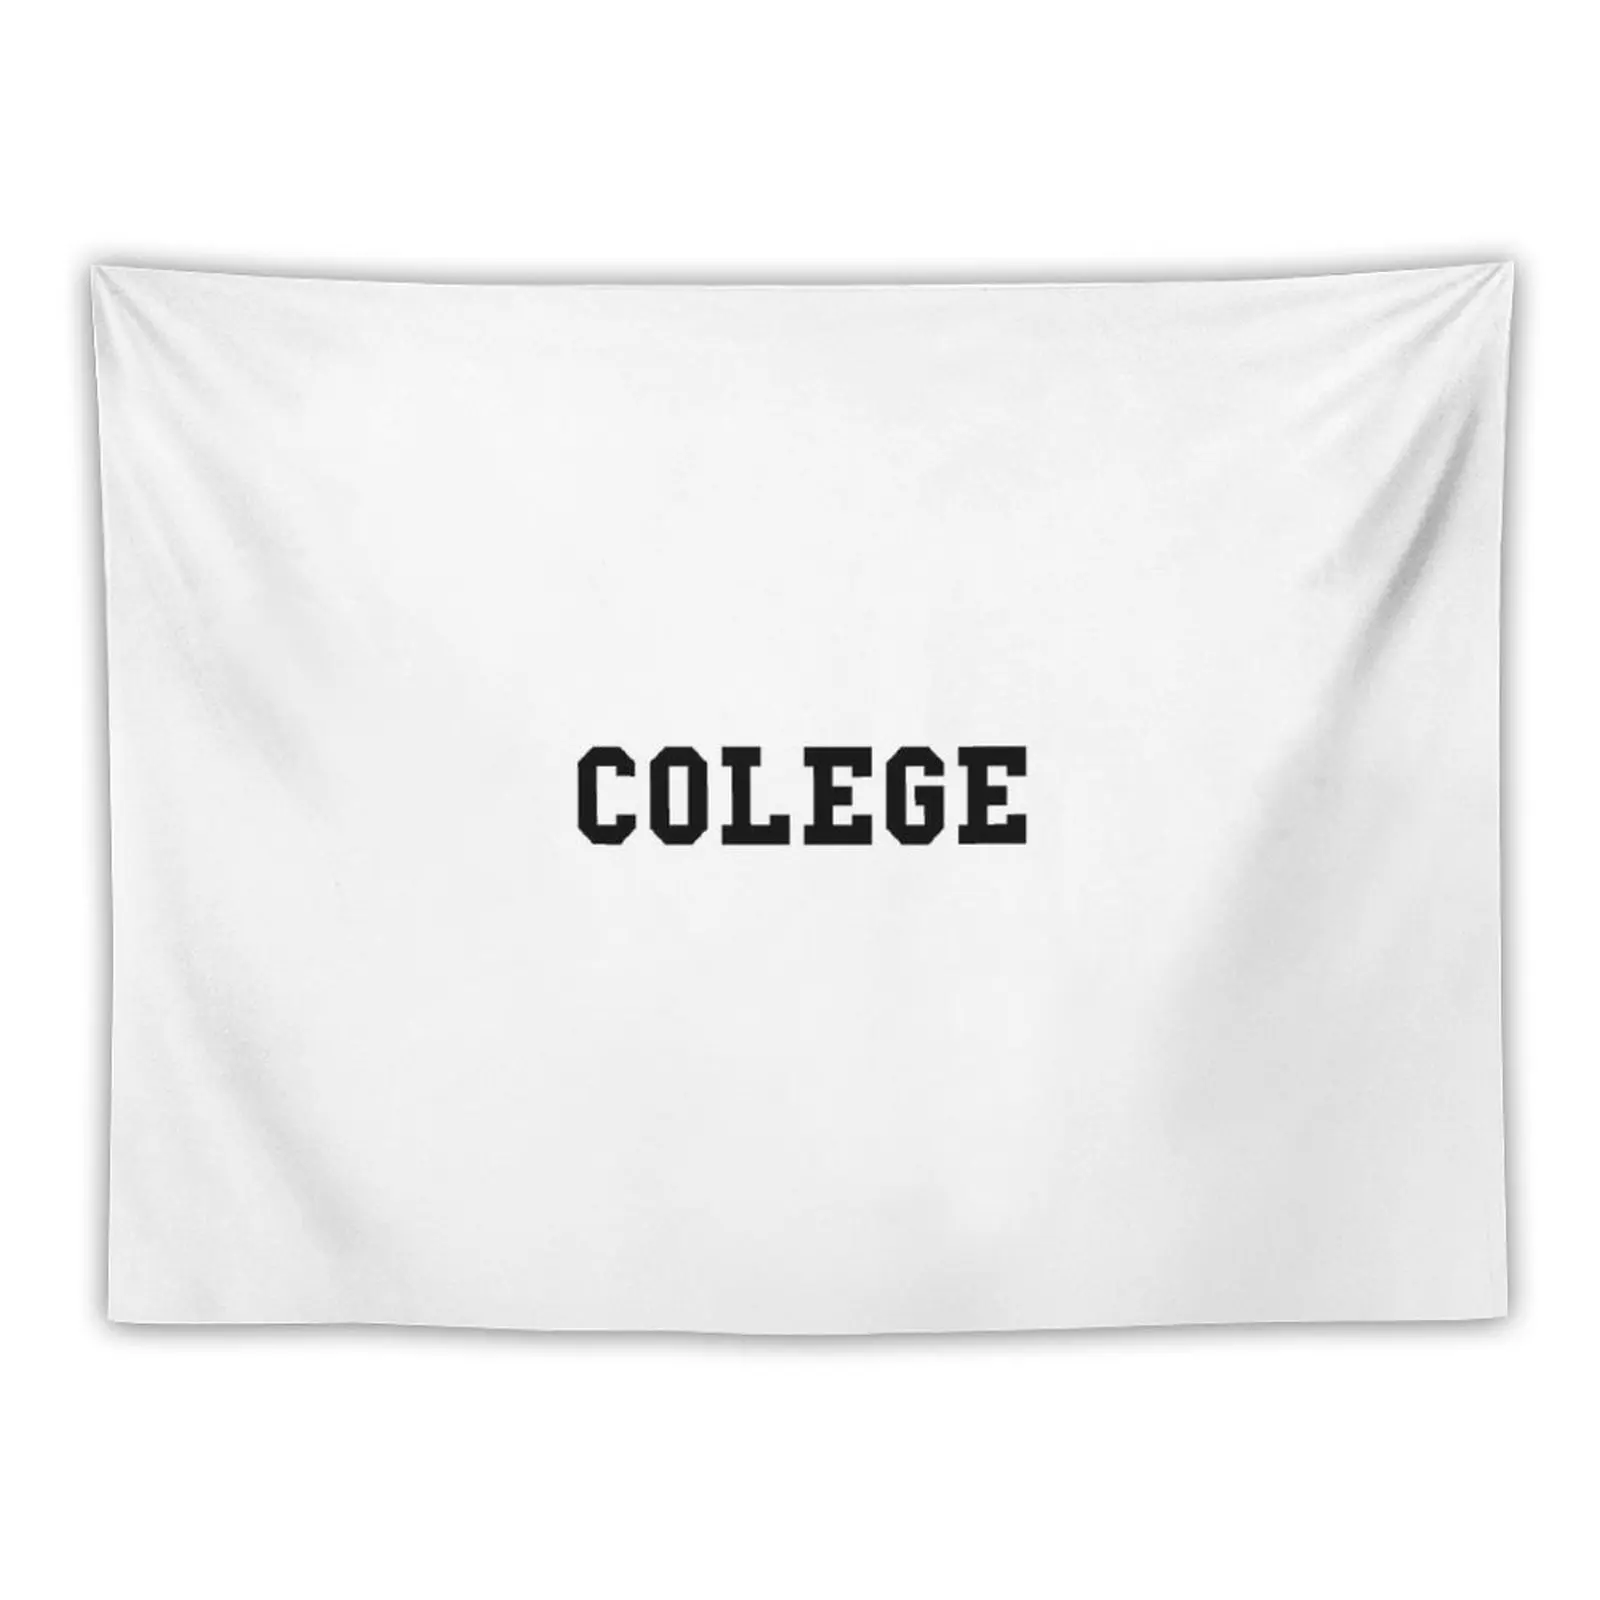 

College Tapestry Room Decorations Aesthetics Wall Decor Home Decoration Accessories Things To Decorate The Room Tapestry